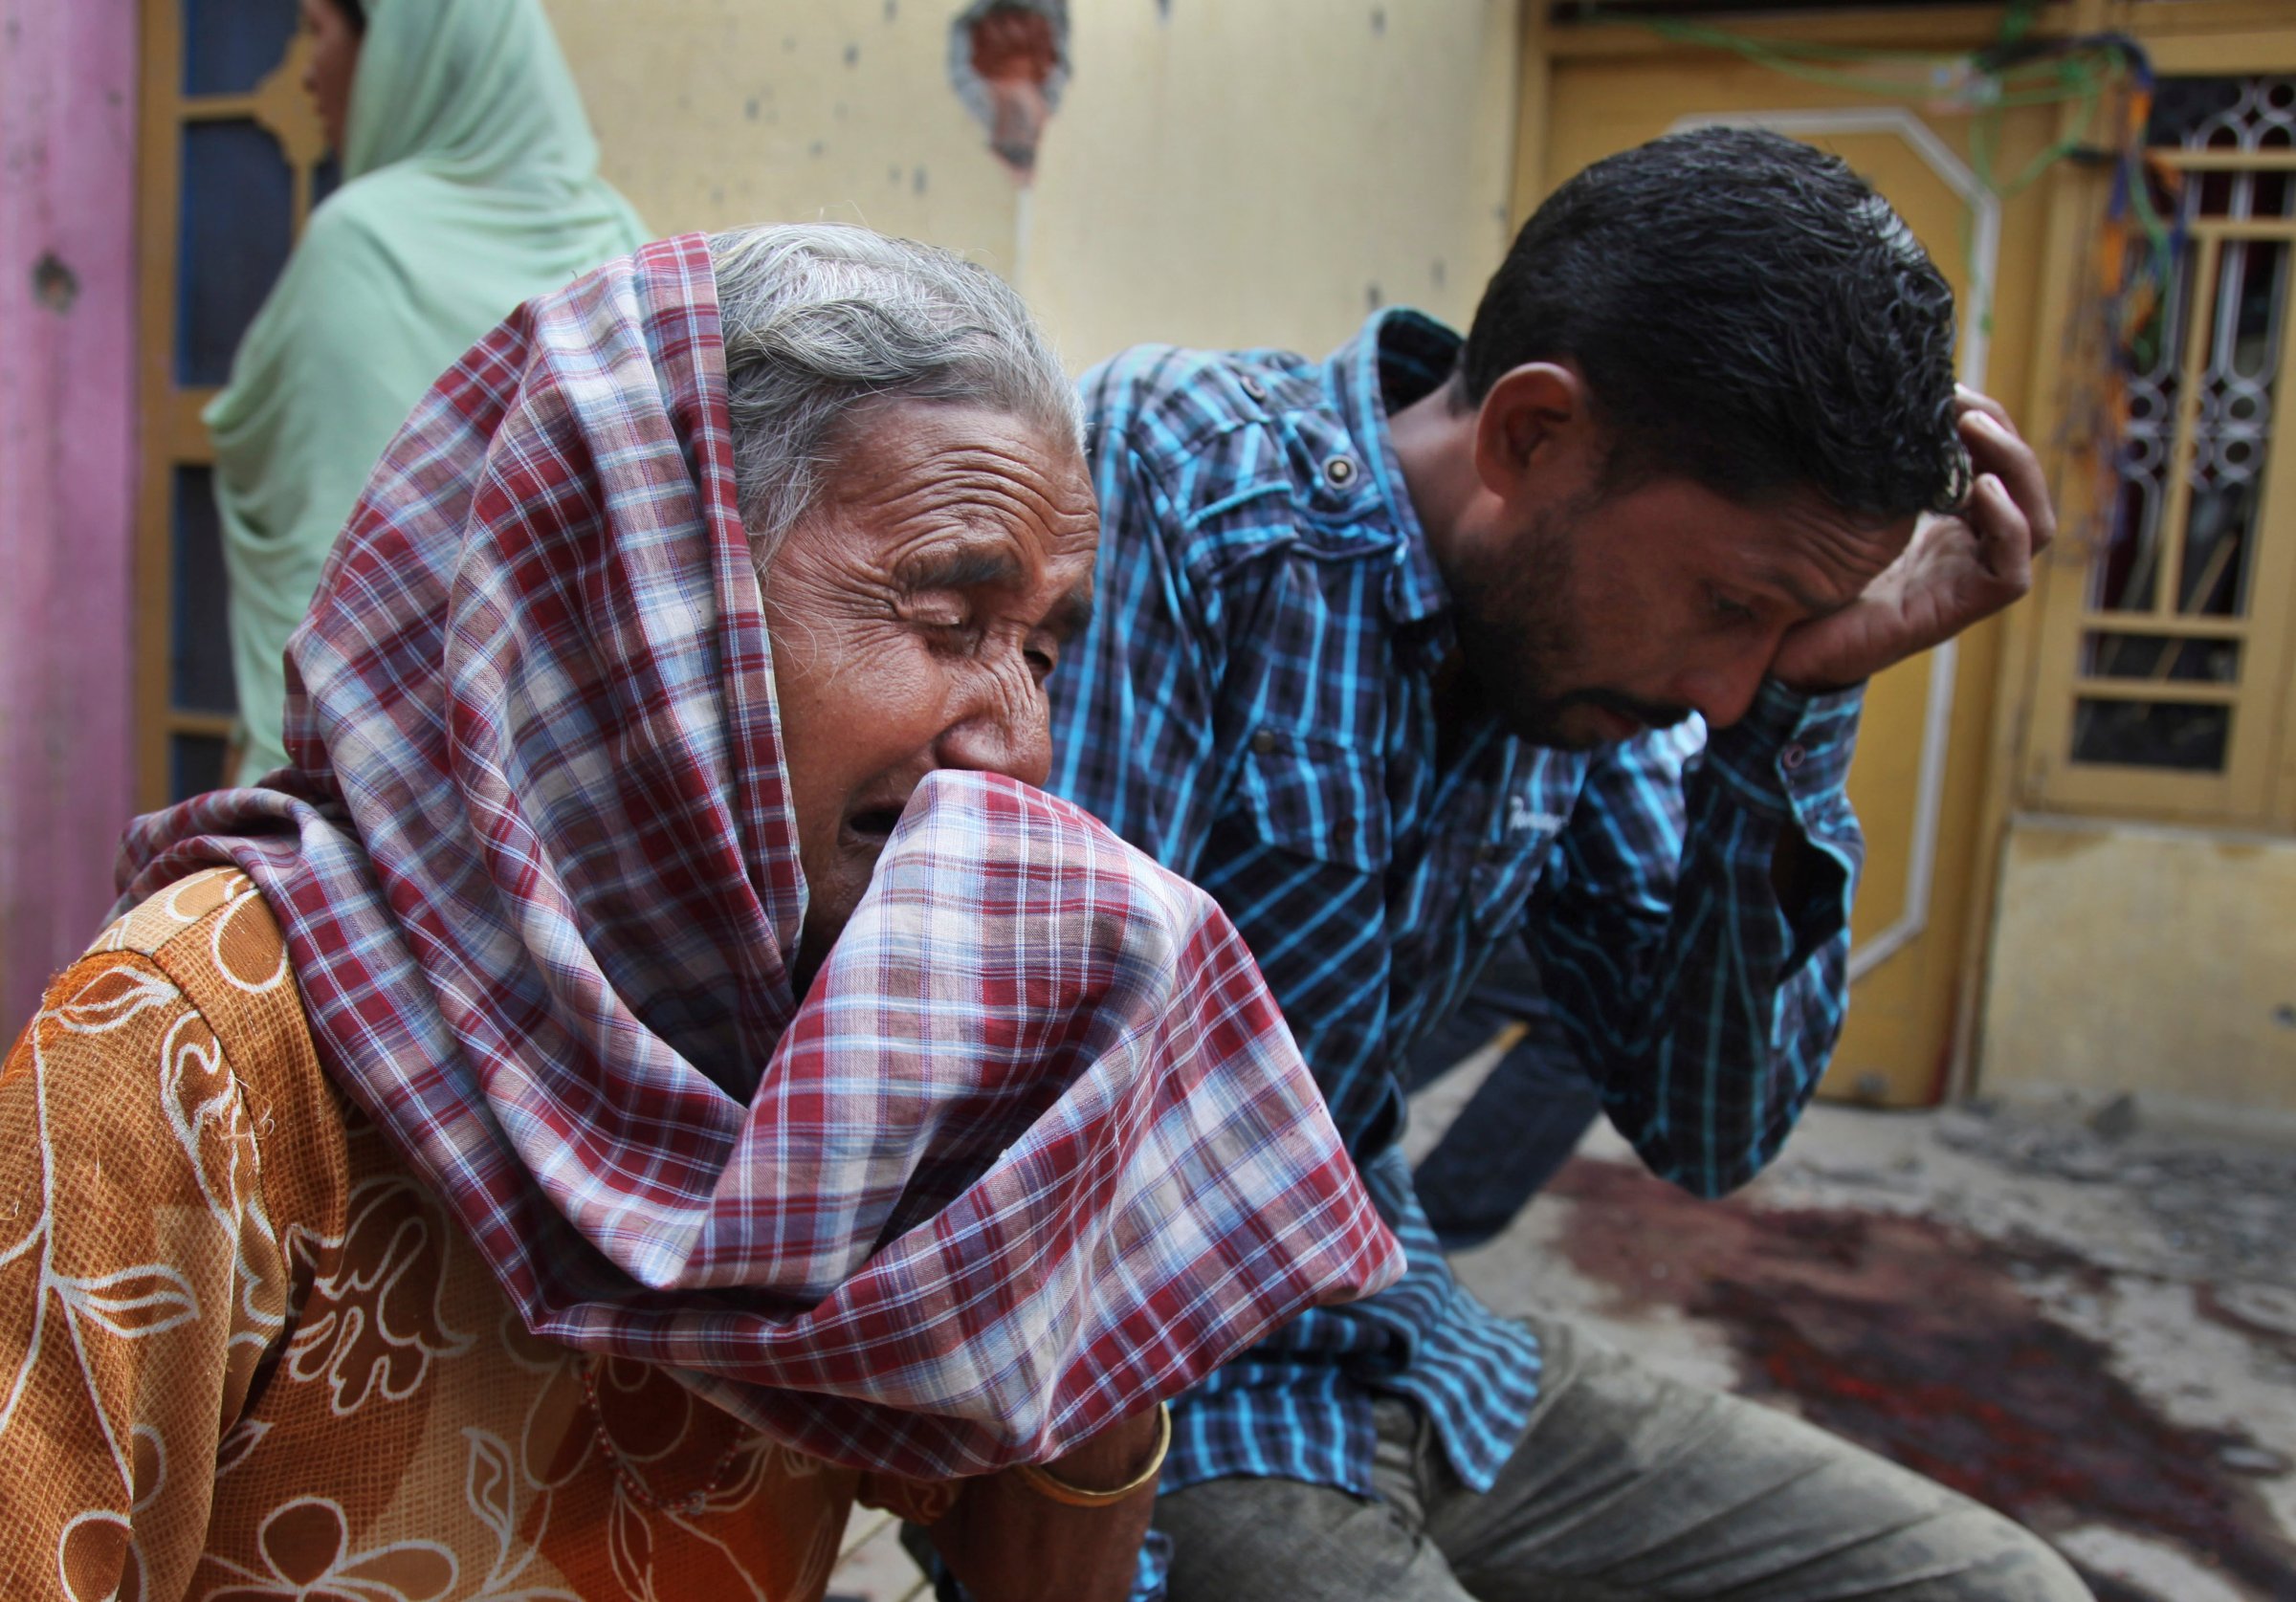 Relatives of Rajesh Kumar, who was killed in mortar shell firing allegedly from the Pakistan's side, weep inside their residential house at Masha da kothe village, in Arnia Sector near the India-Pakistan international border, about 30 miles)from Jammu, India, on Monday.